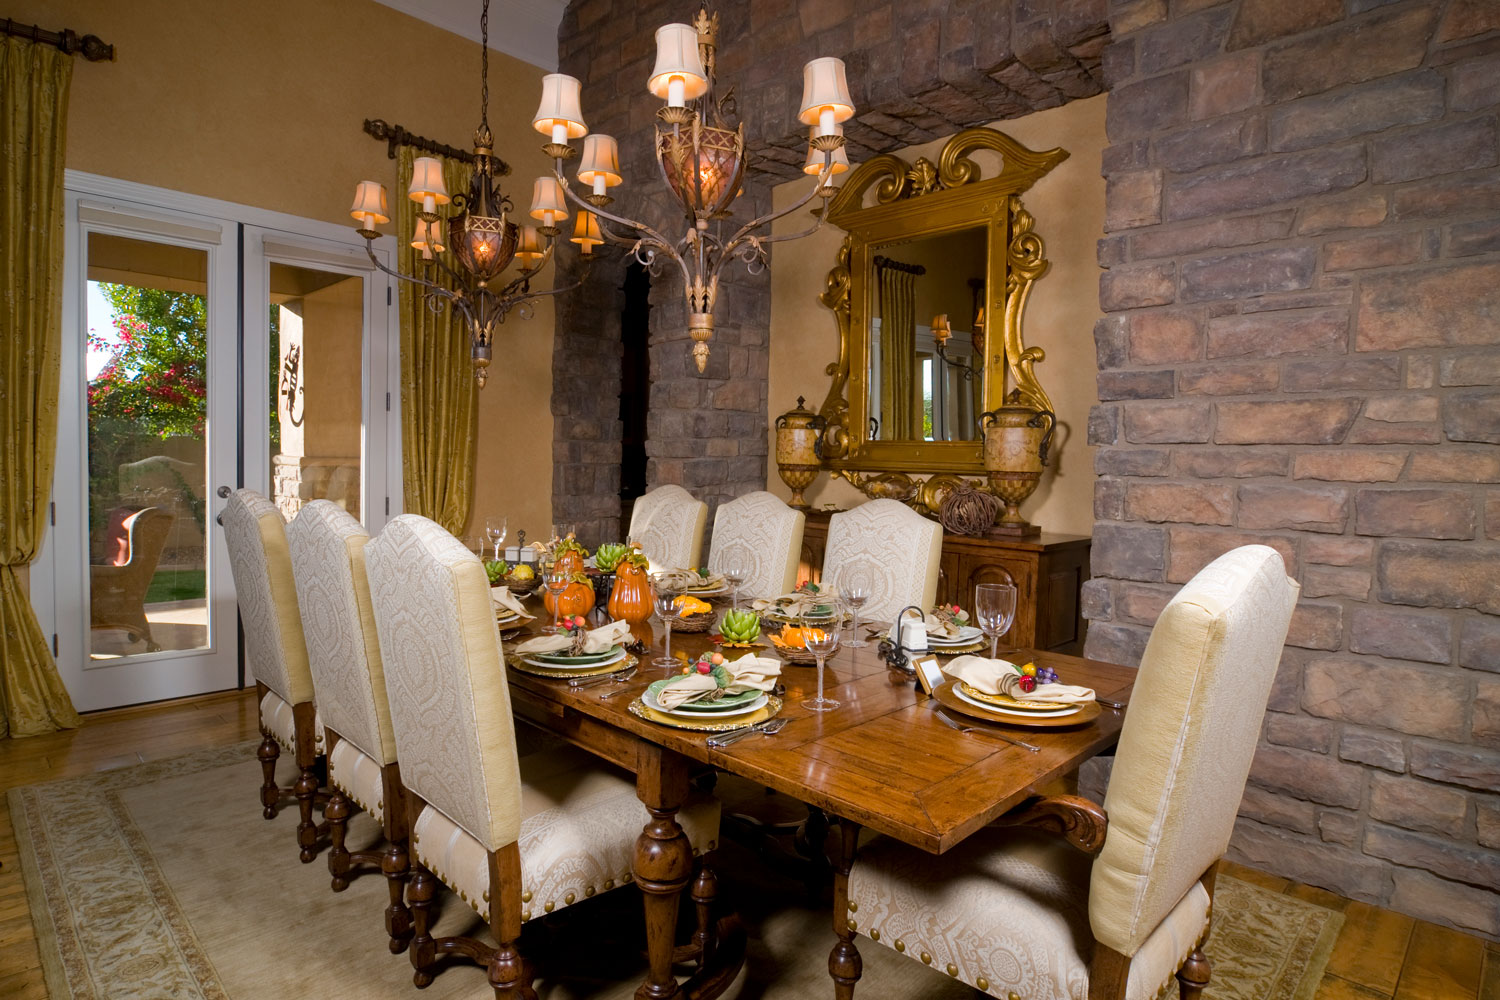 Rustic and mid century inspired dining area with a huge chandelier and wooden tables and cabinets